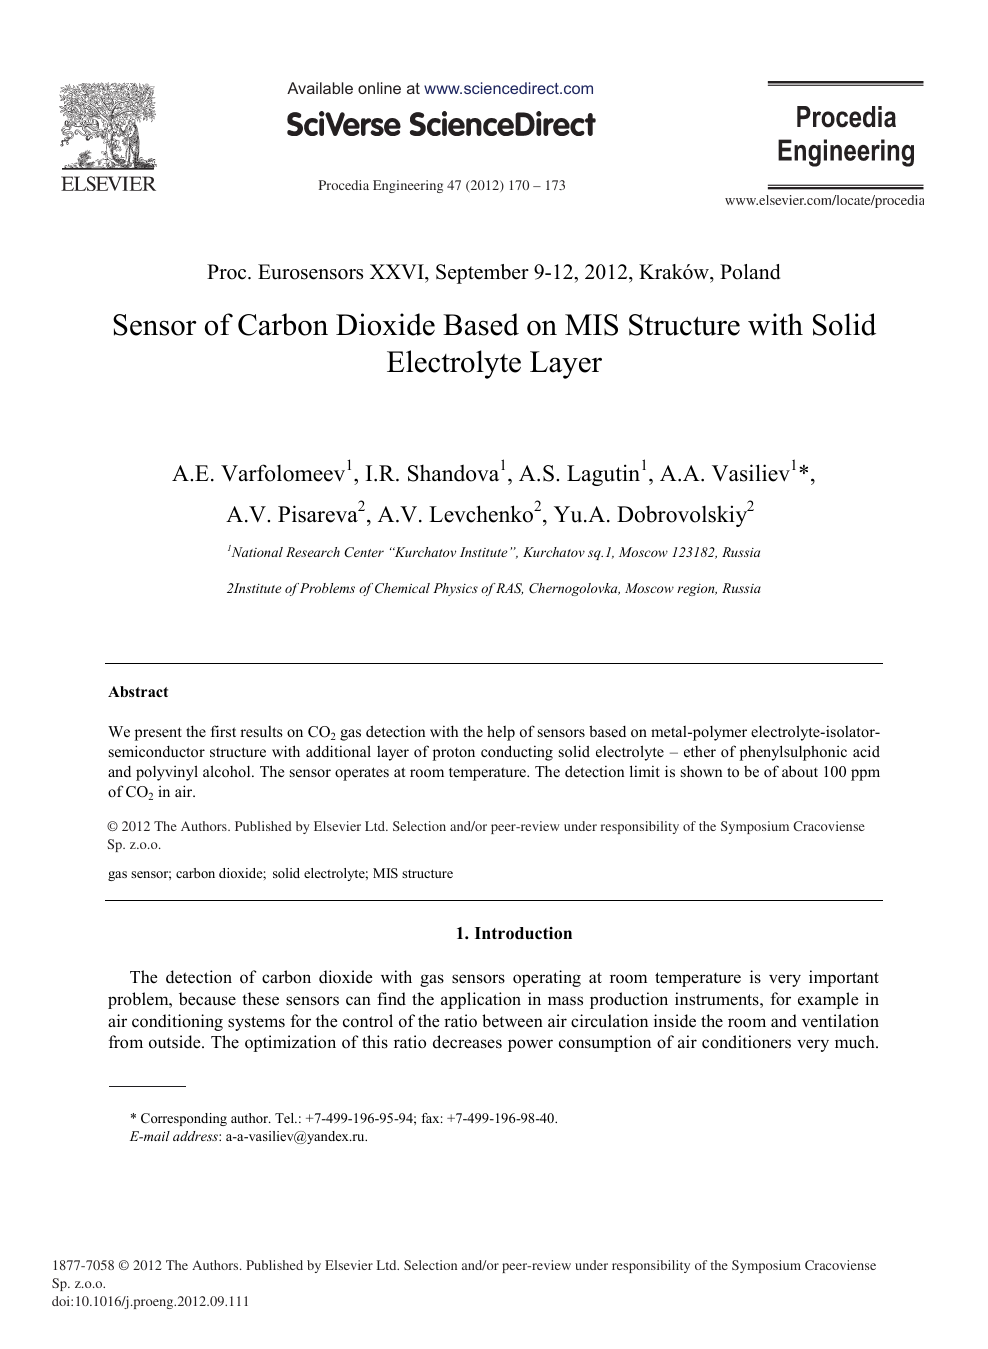 Sensor Of Carbon Dioxide Based On Mis Structure With Solid Electrolyte Layer Topic Of Research Paper In Materials Engineering Download Scholarly Article Pdf And Read For Free On Cyberleninka Open Science